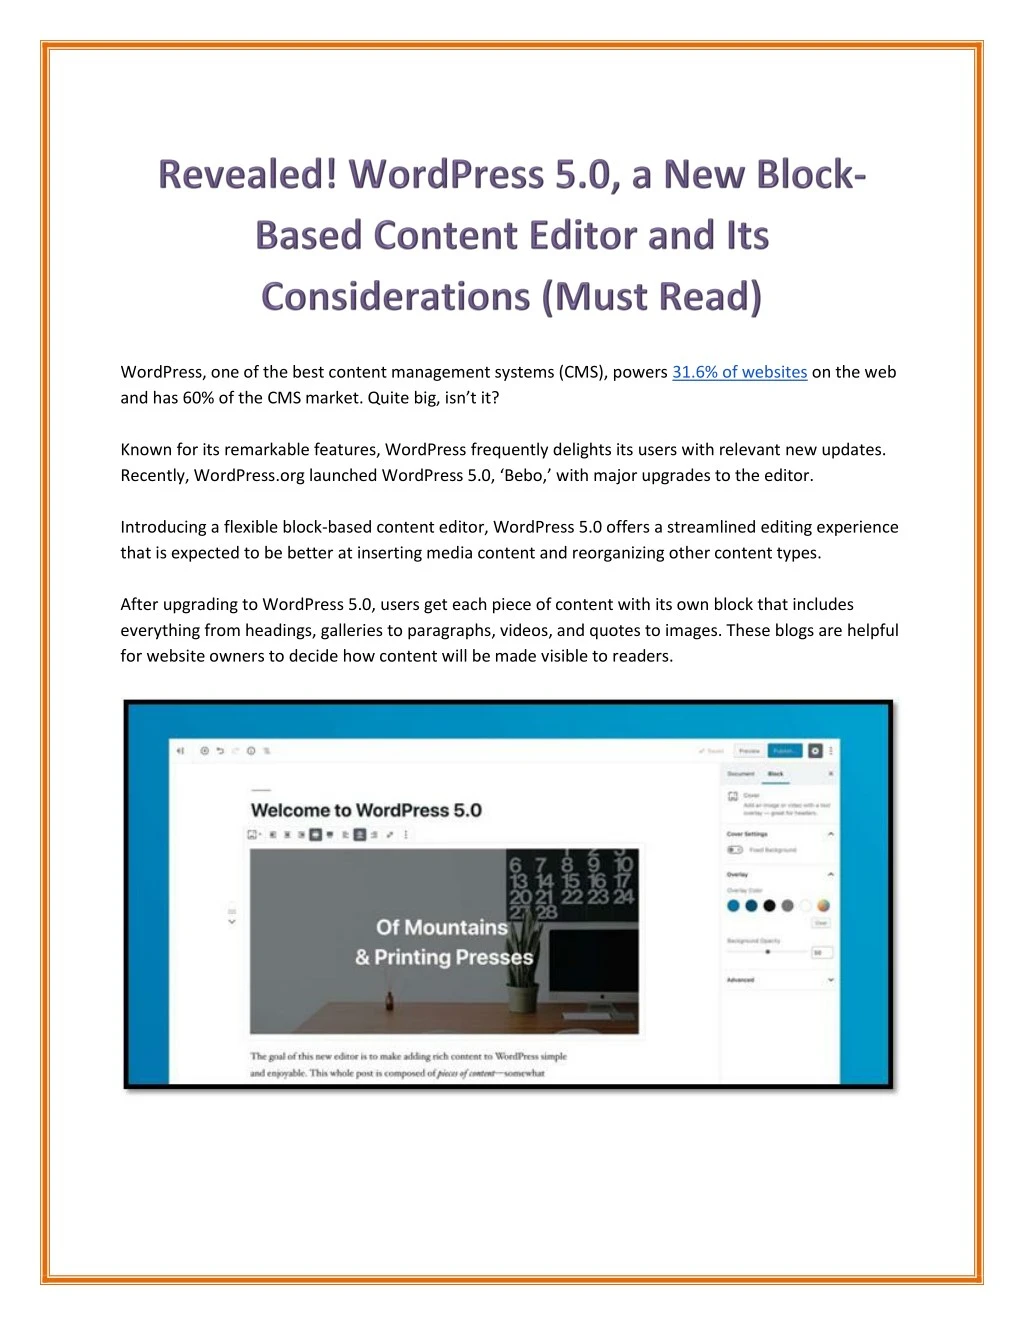 wordpress one of the best content management